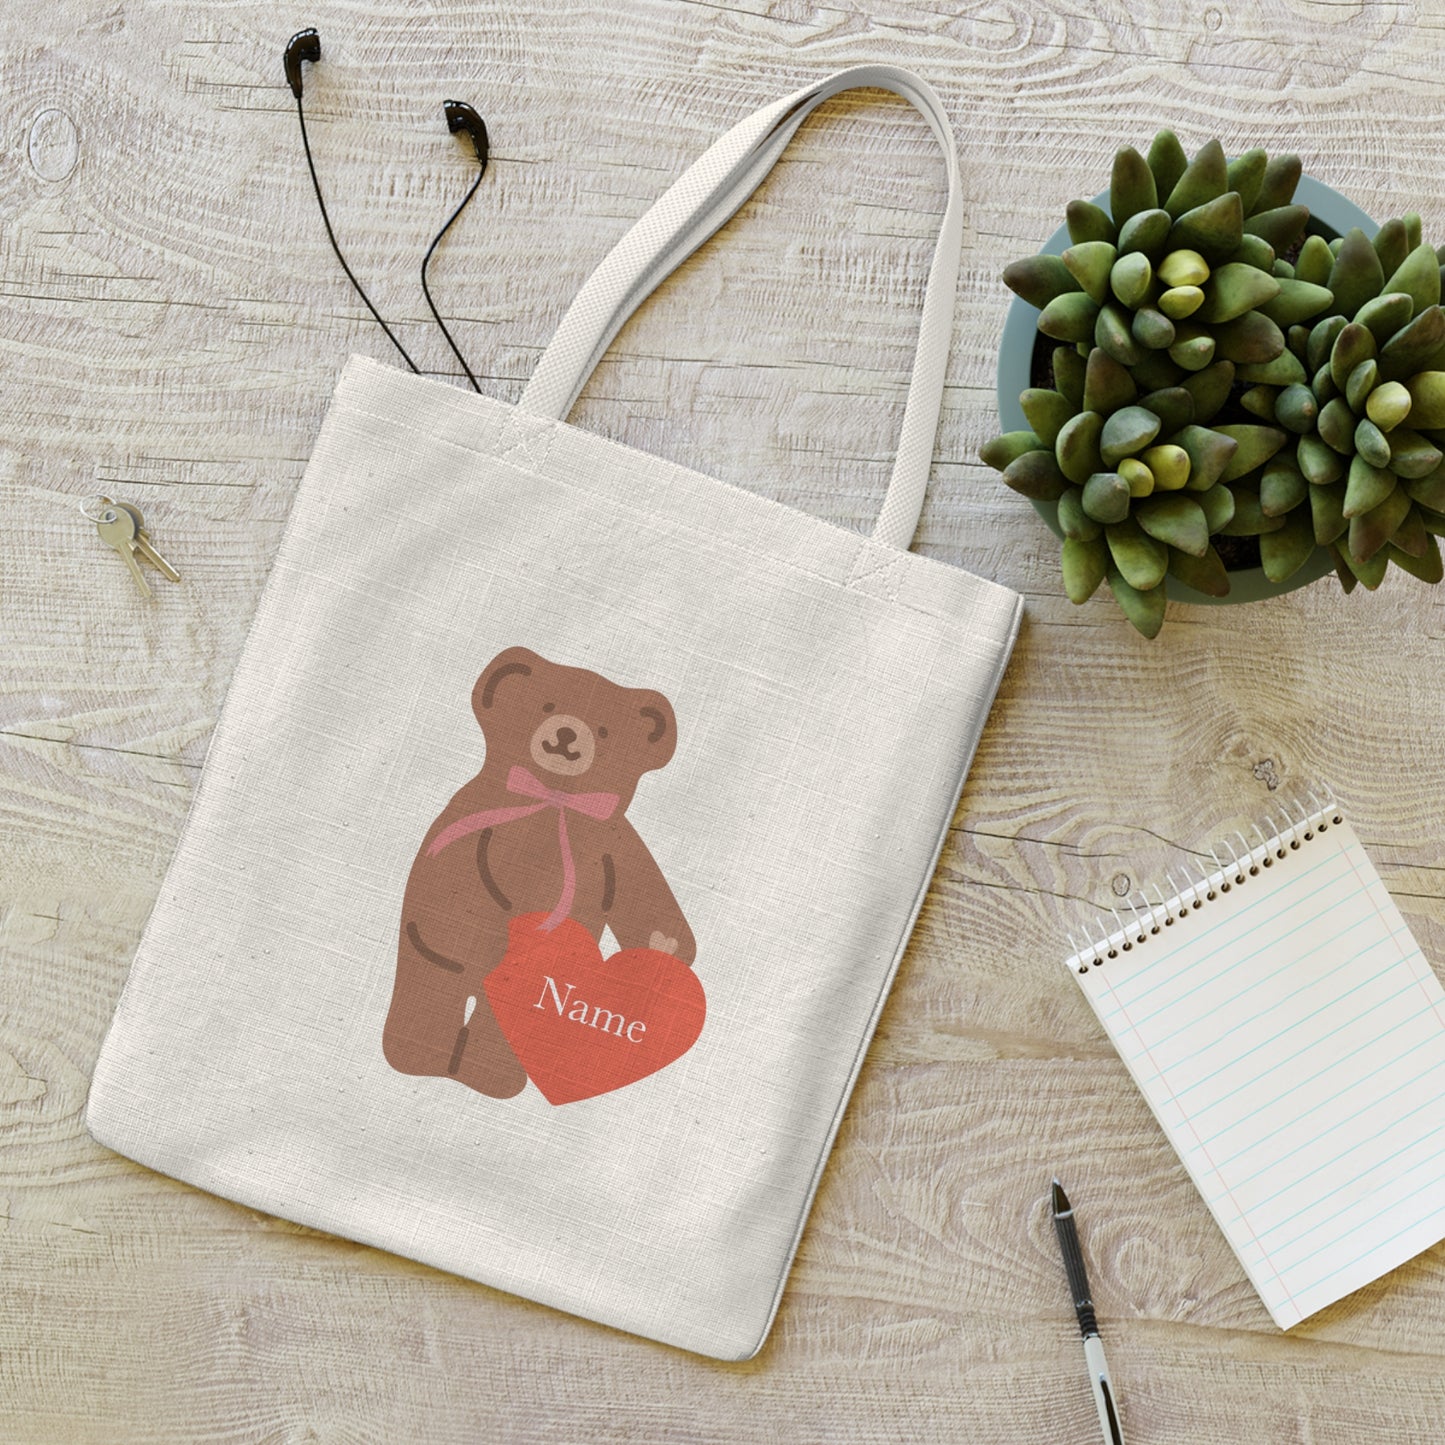 Personalised Teddy Name, Polyester Tote Bag, customised tote bag, gift for her